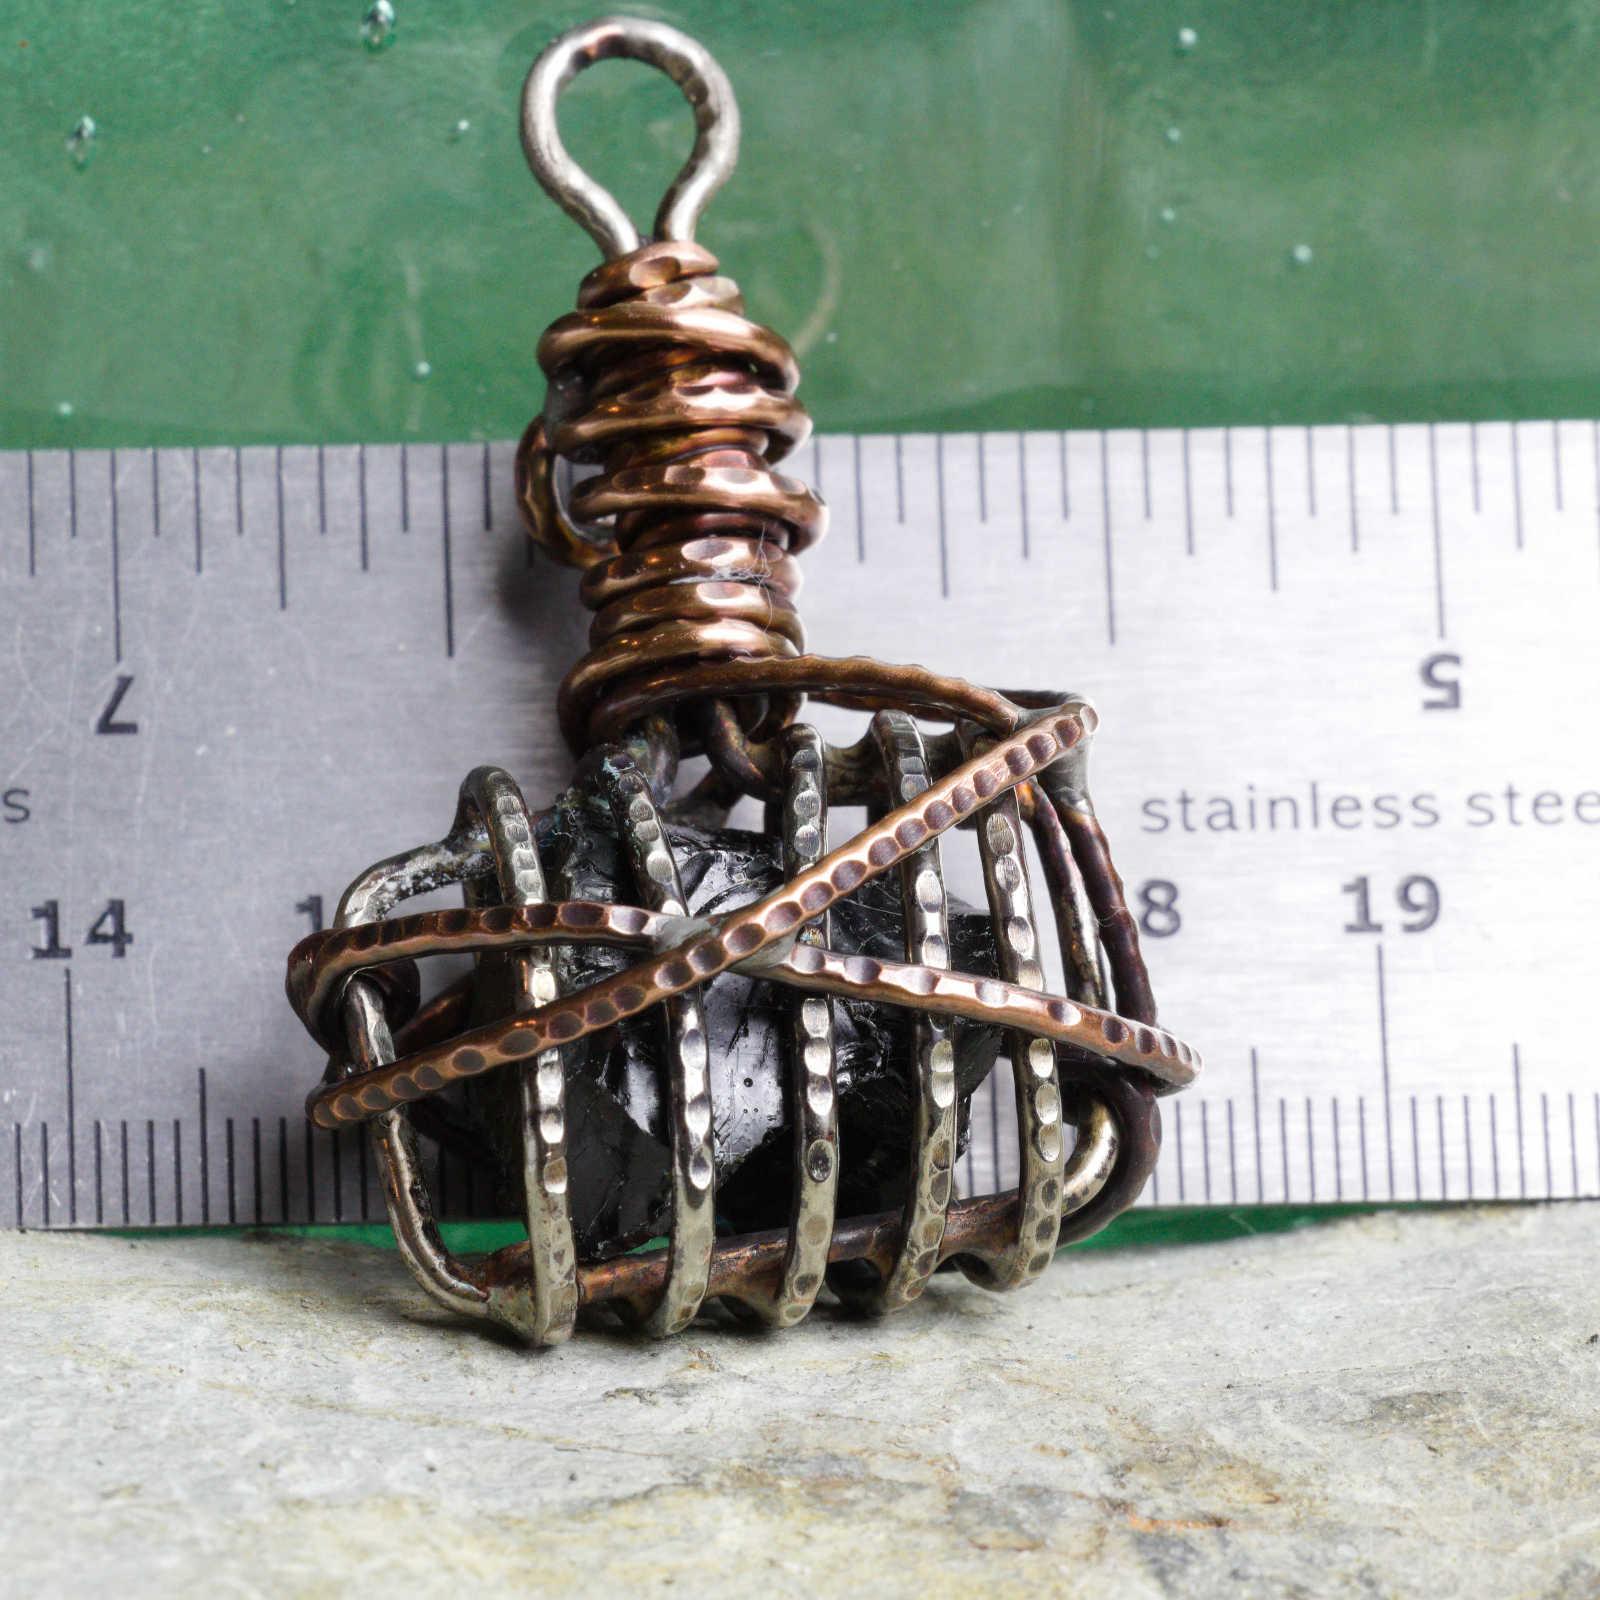 Caged Copper Slag Accessory with ruler to show scale